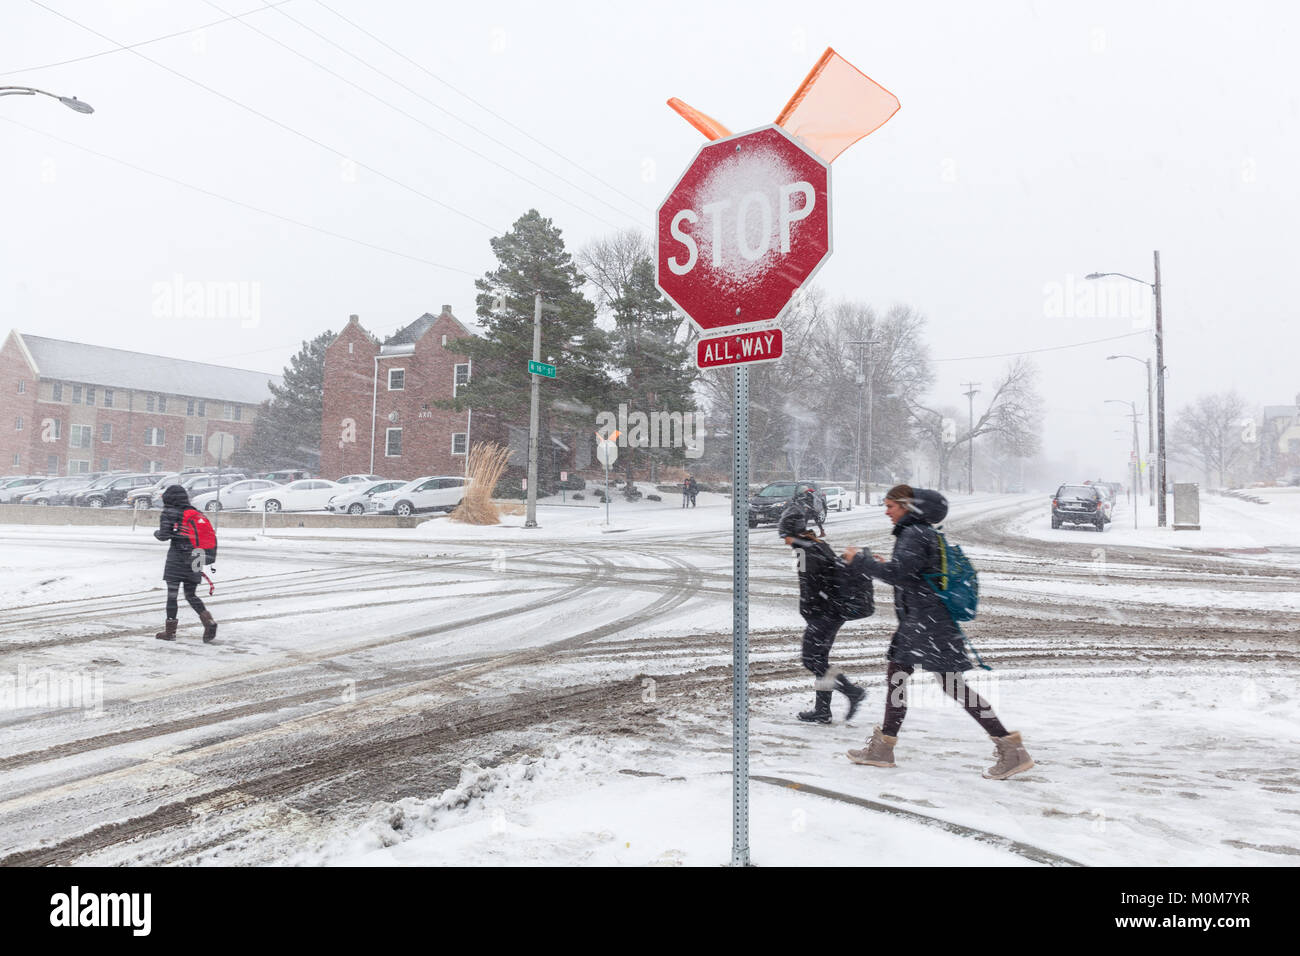 Lincoln, USA. 22nd Jan, 2018. Students at the University of Nebraska in Lincoln, NE begin to cross a snow covered street during a snowstorm. Credit: LorenRyePhoto/Alamy Live News Stock Photo